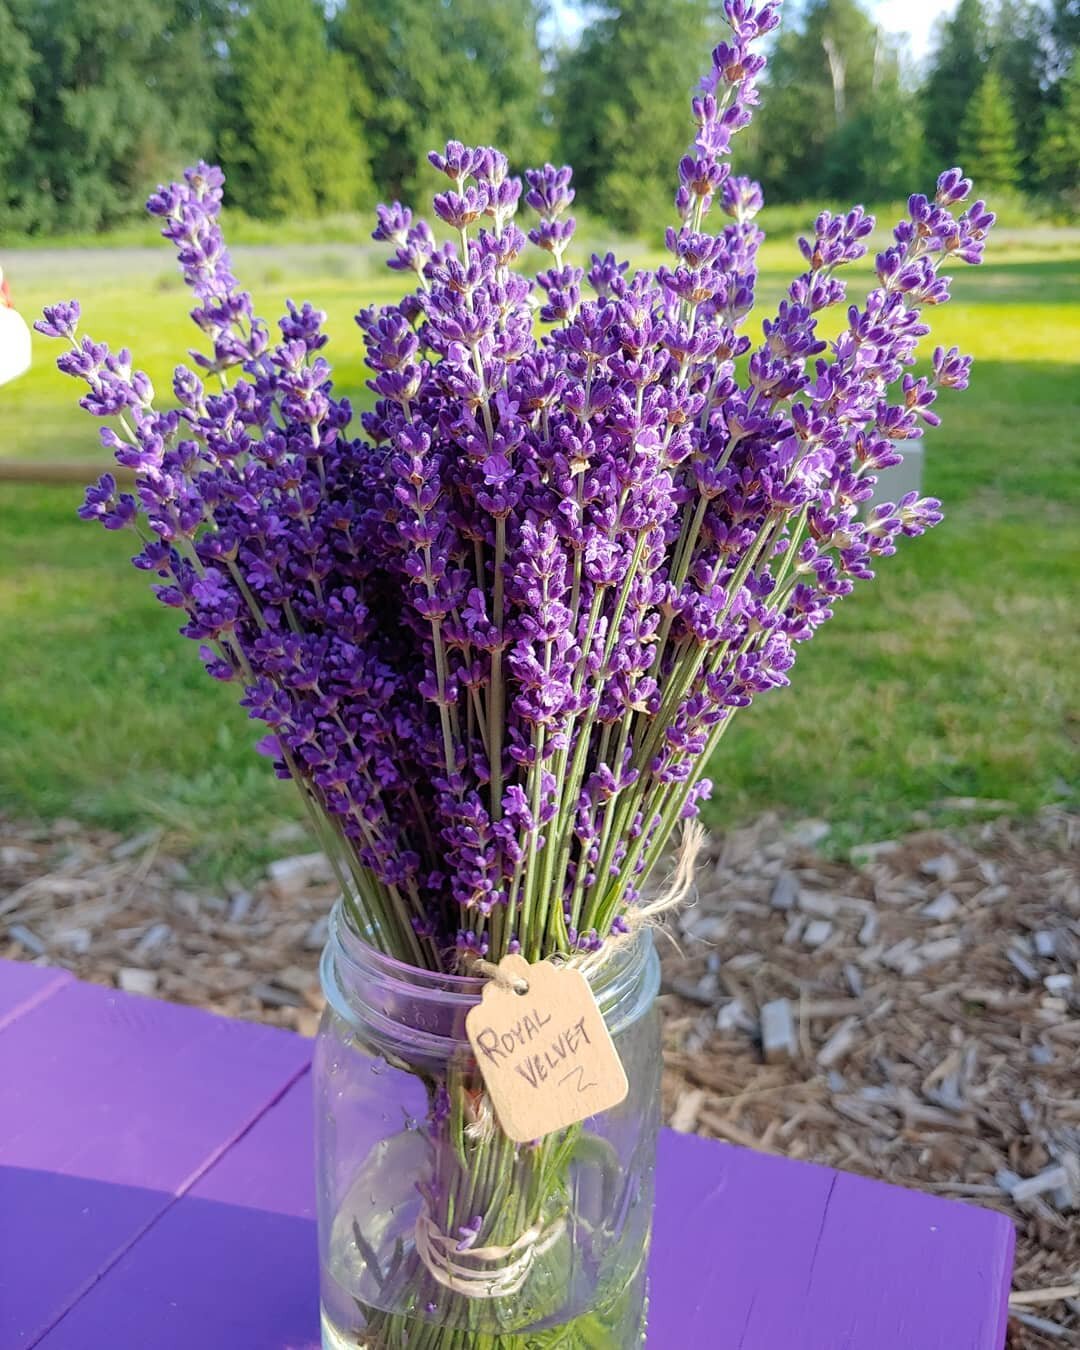 Royal Velvet lavender. Beautiful Dark blue flowers. 10-12 inch stems. Holds its color when dried. This is ready for you to pick now through next week.